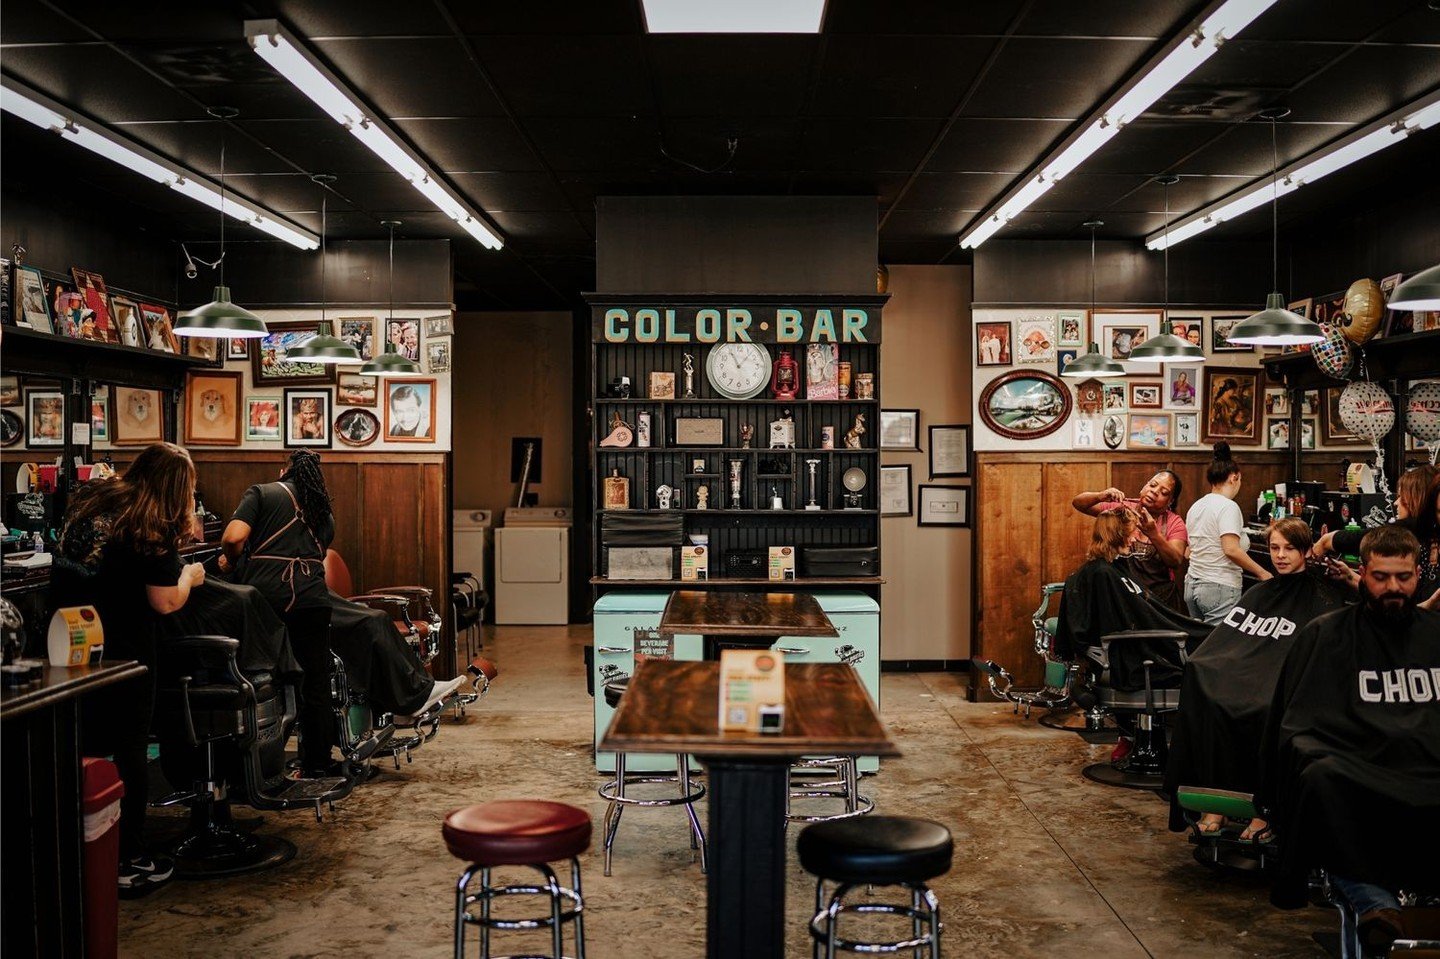 Step inside the vintage barbershop environment at #CHOPPortWentworth! 💈✨ From the vintage decor to the buzzing atmosphere, every corner exudes classic charm and modern style. #ChopBarbershop #BarberLife #BarberShopInterior #VintageVibes #GroomingGoa